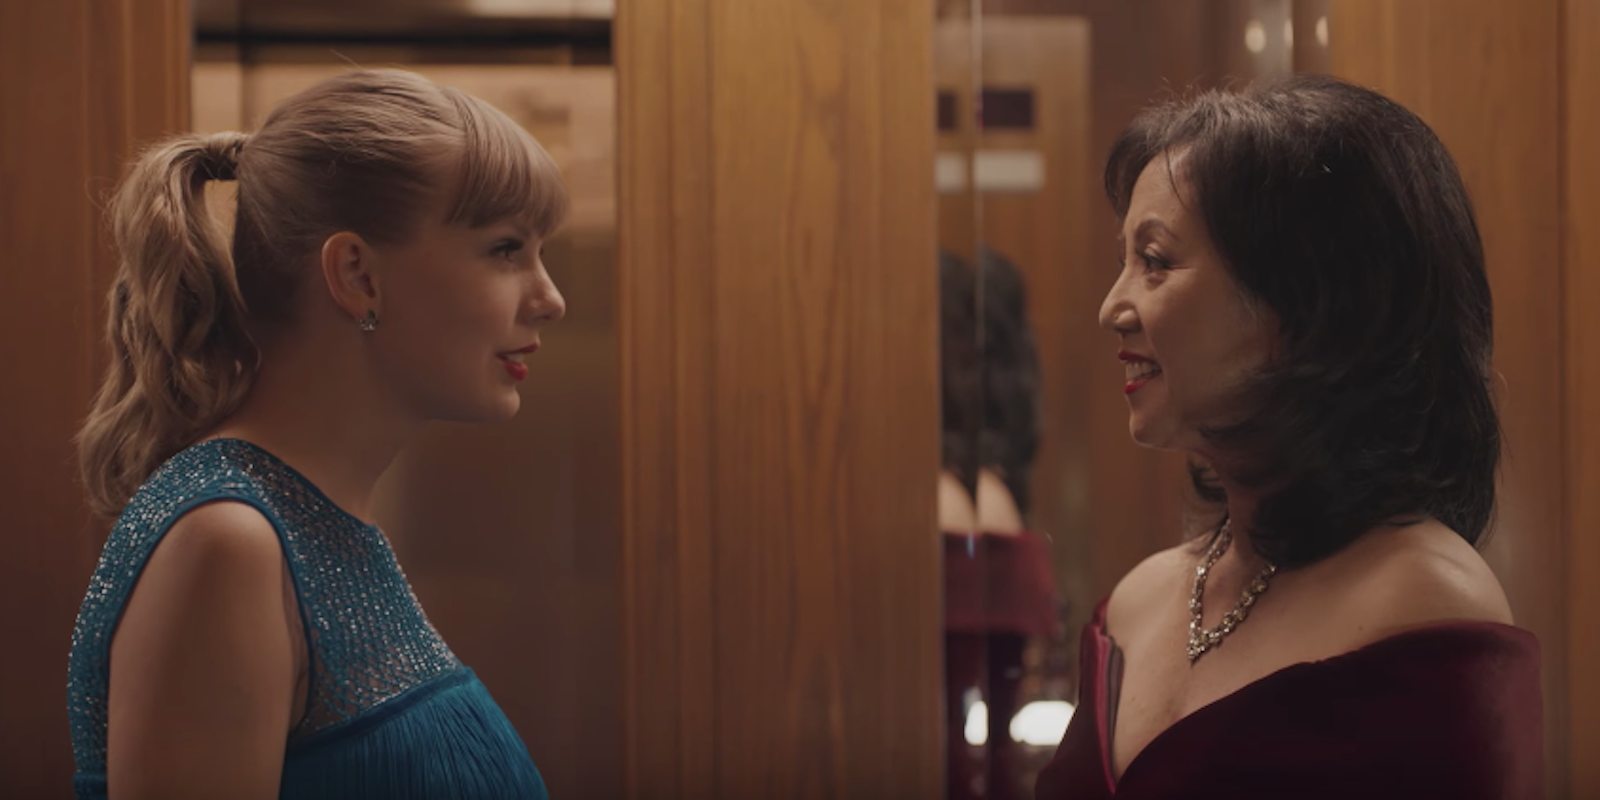 Taylor Swift and Junko Cheng stand face to face in the 'Delicate' video